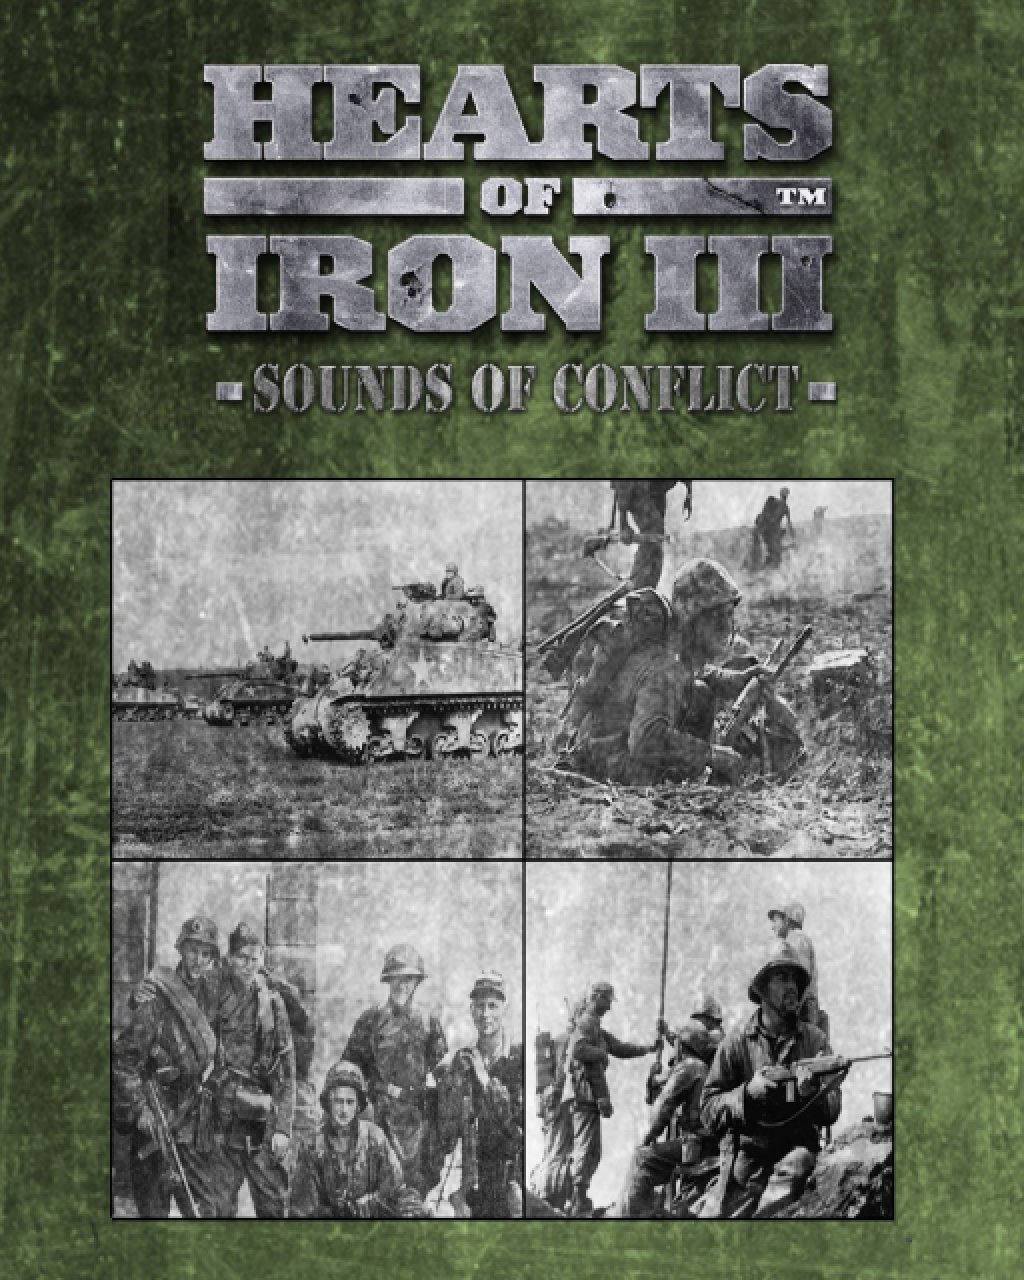 Hearts of Iron III Sounds of Conflict